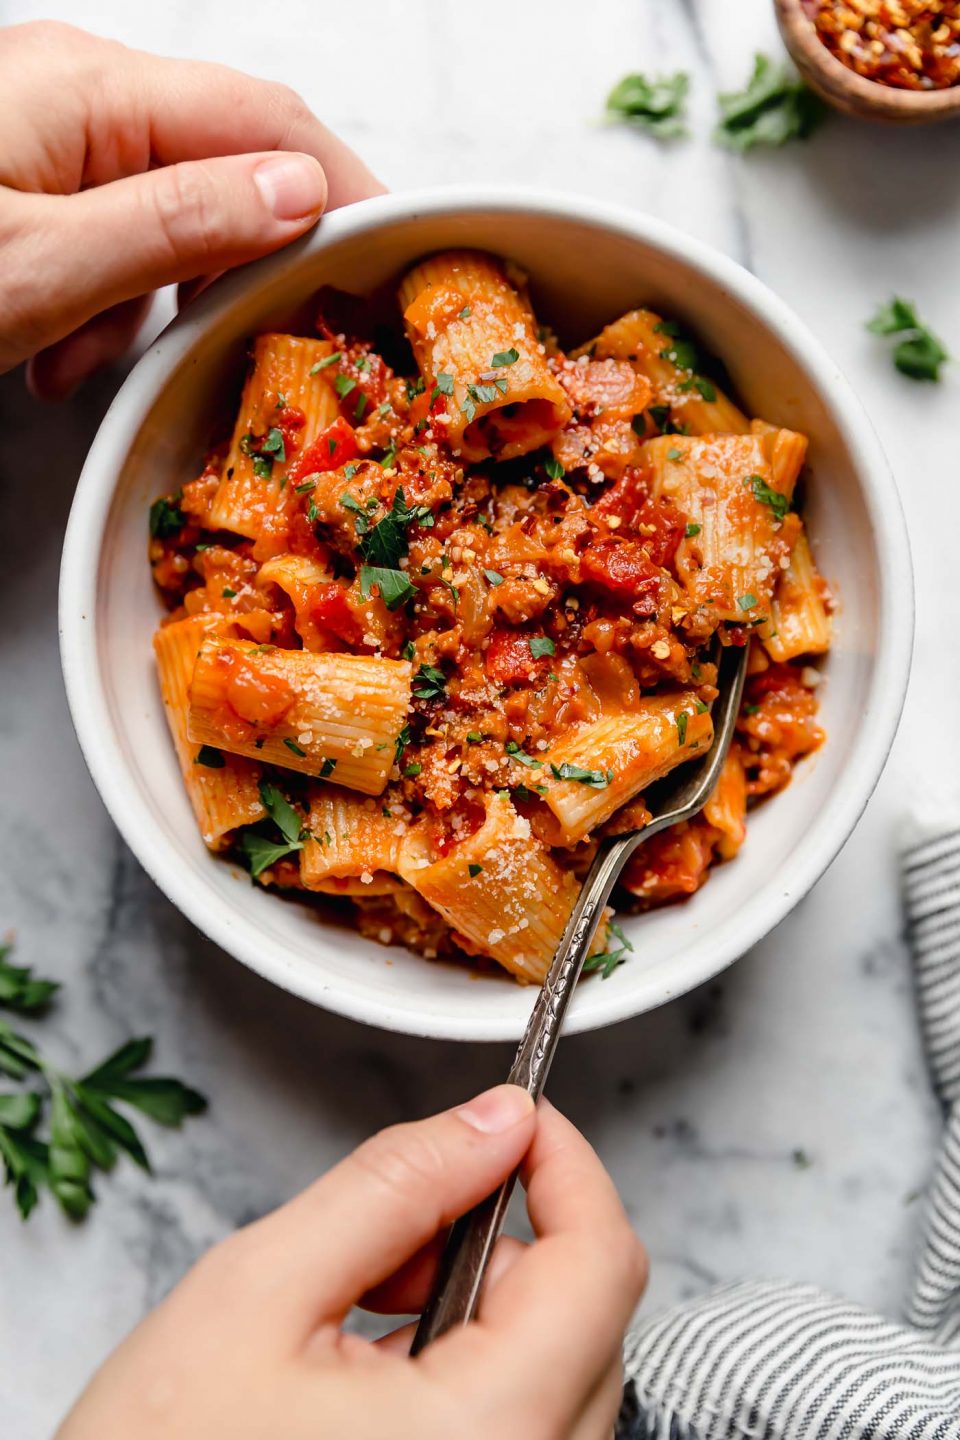 Italian Sausage & peppers pasta served in a white bowl sitting on a white marble surface surrounded by a striped linen napkin, fresh parsley leaves, & a small wooden bowl filled with crushed red pepper flakes.